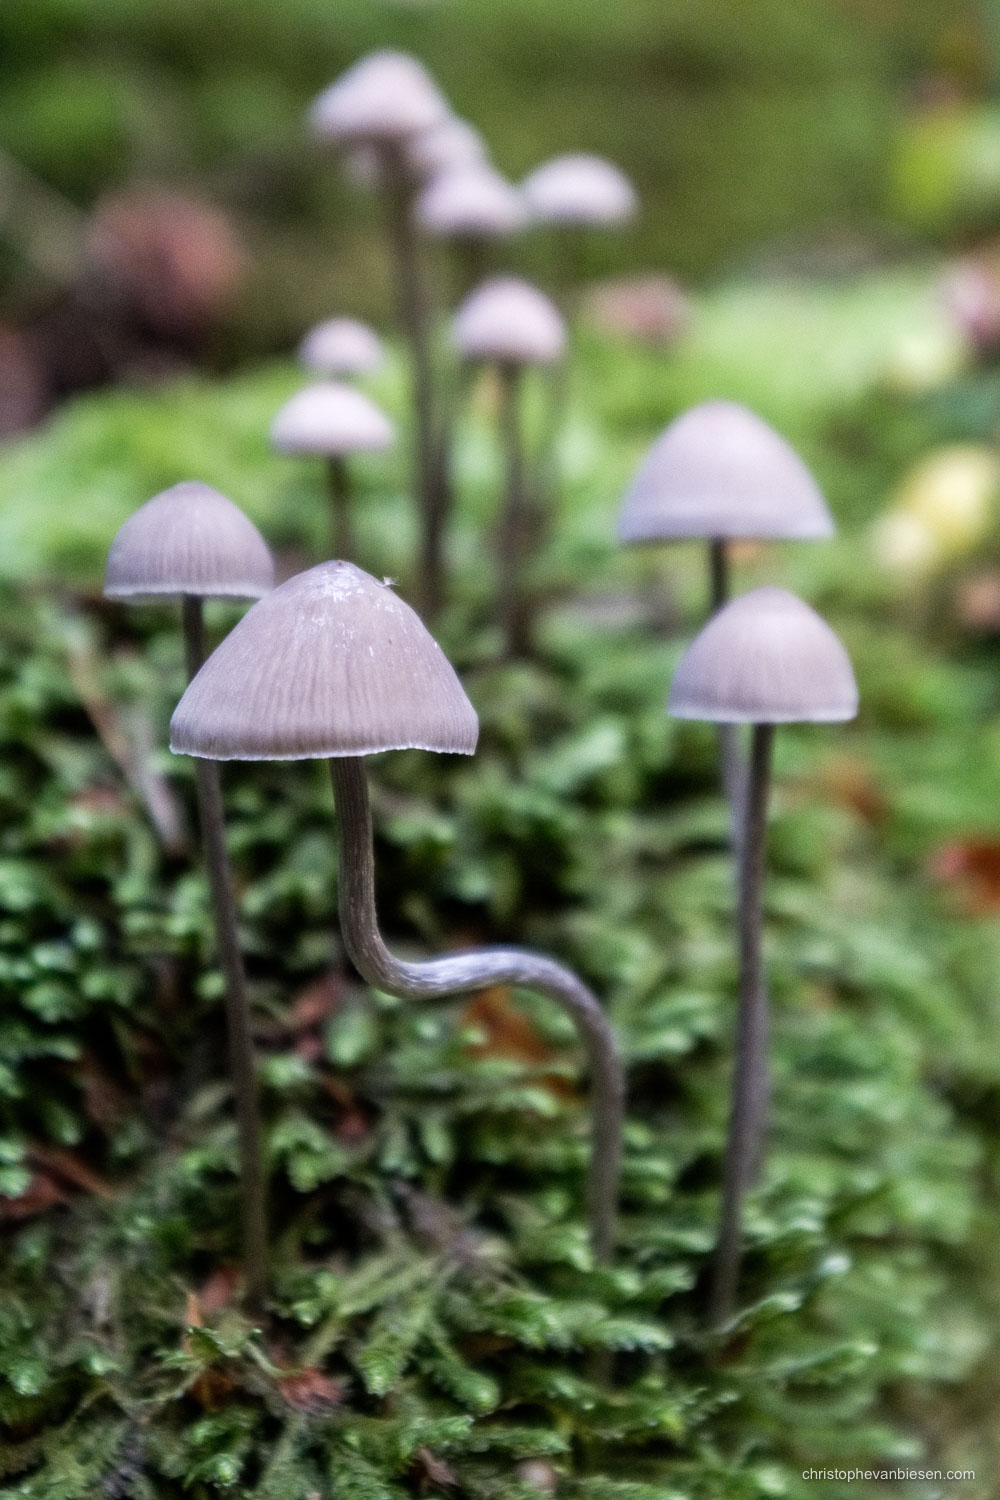 Visit the Mullerthal - Luxembourg - Mushrooms in the Mullerthal region in Luxembourg - Be Unique